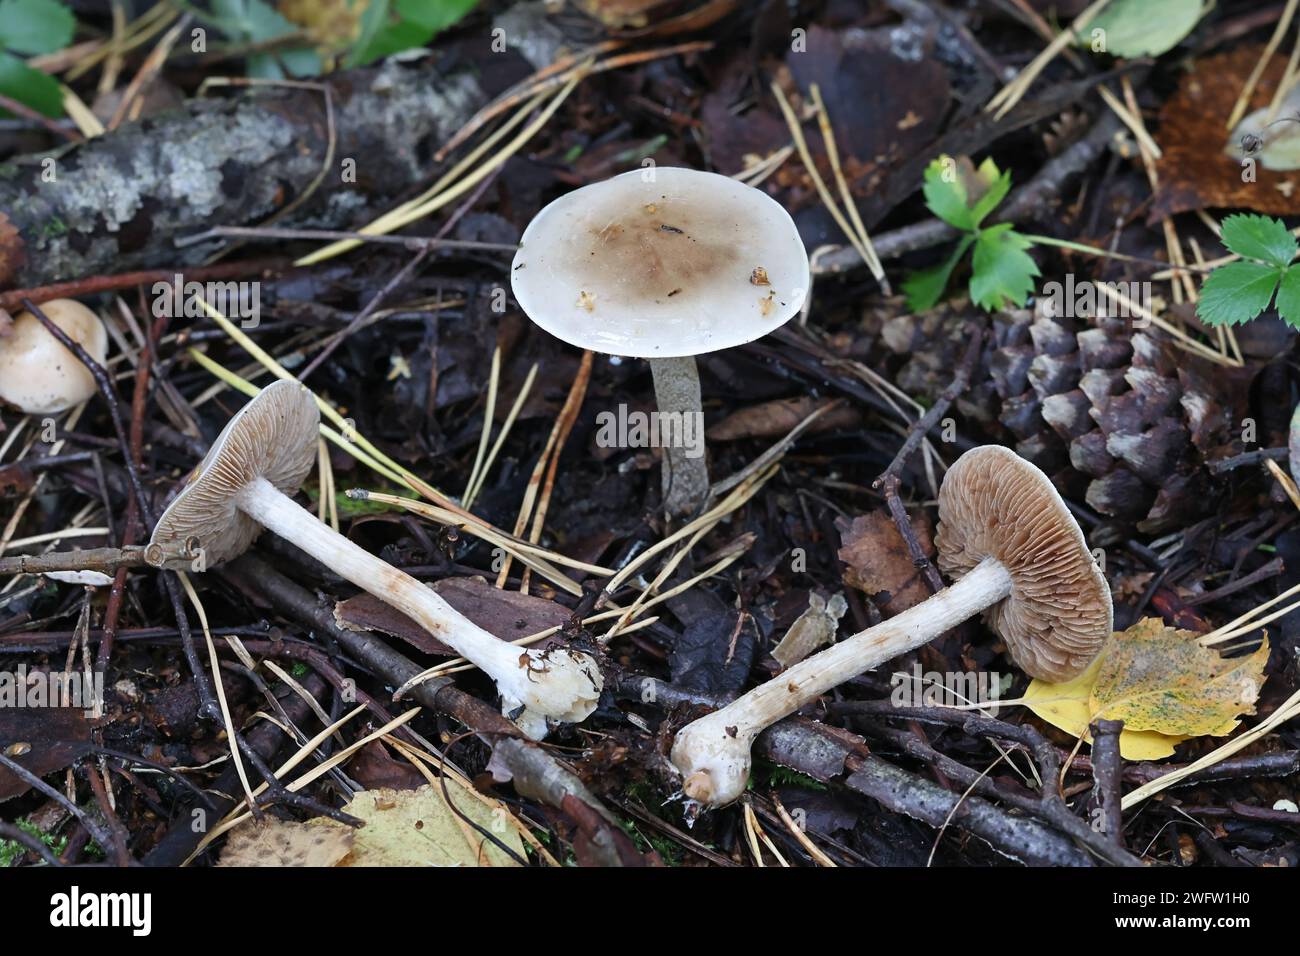 Hebeloma incarnatulum, commonly known as poison pie, wild  mushroom from Finland Stock Photo